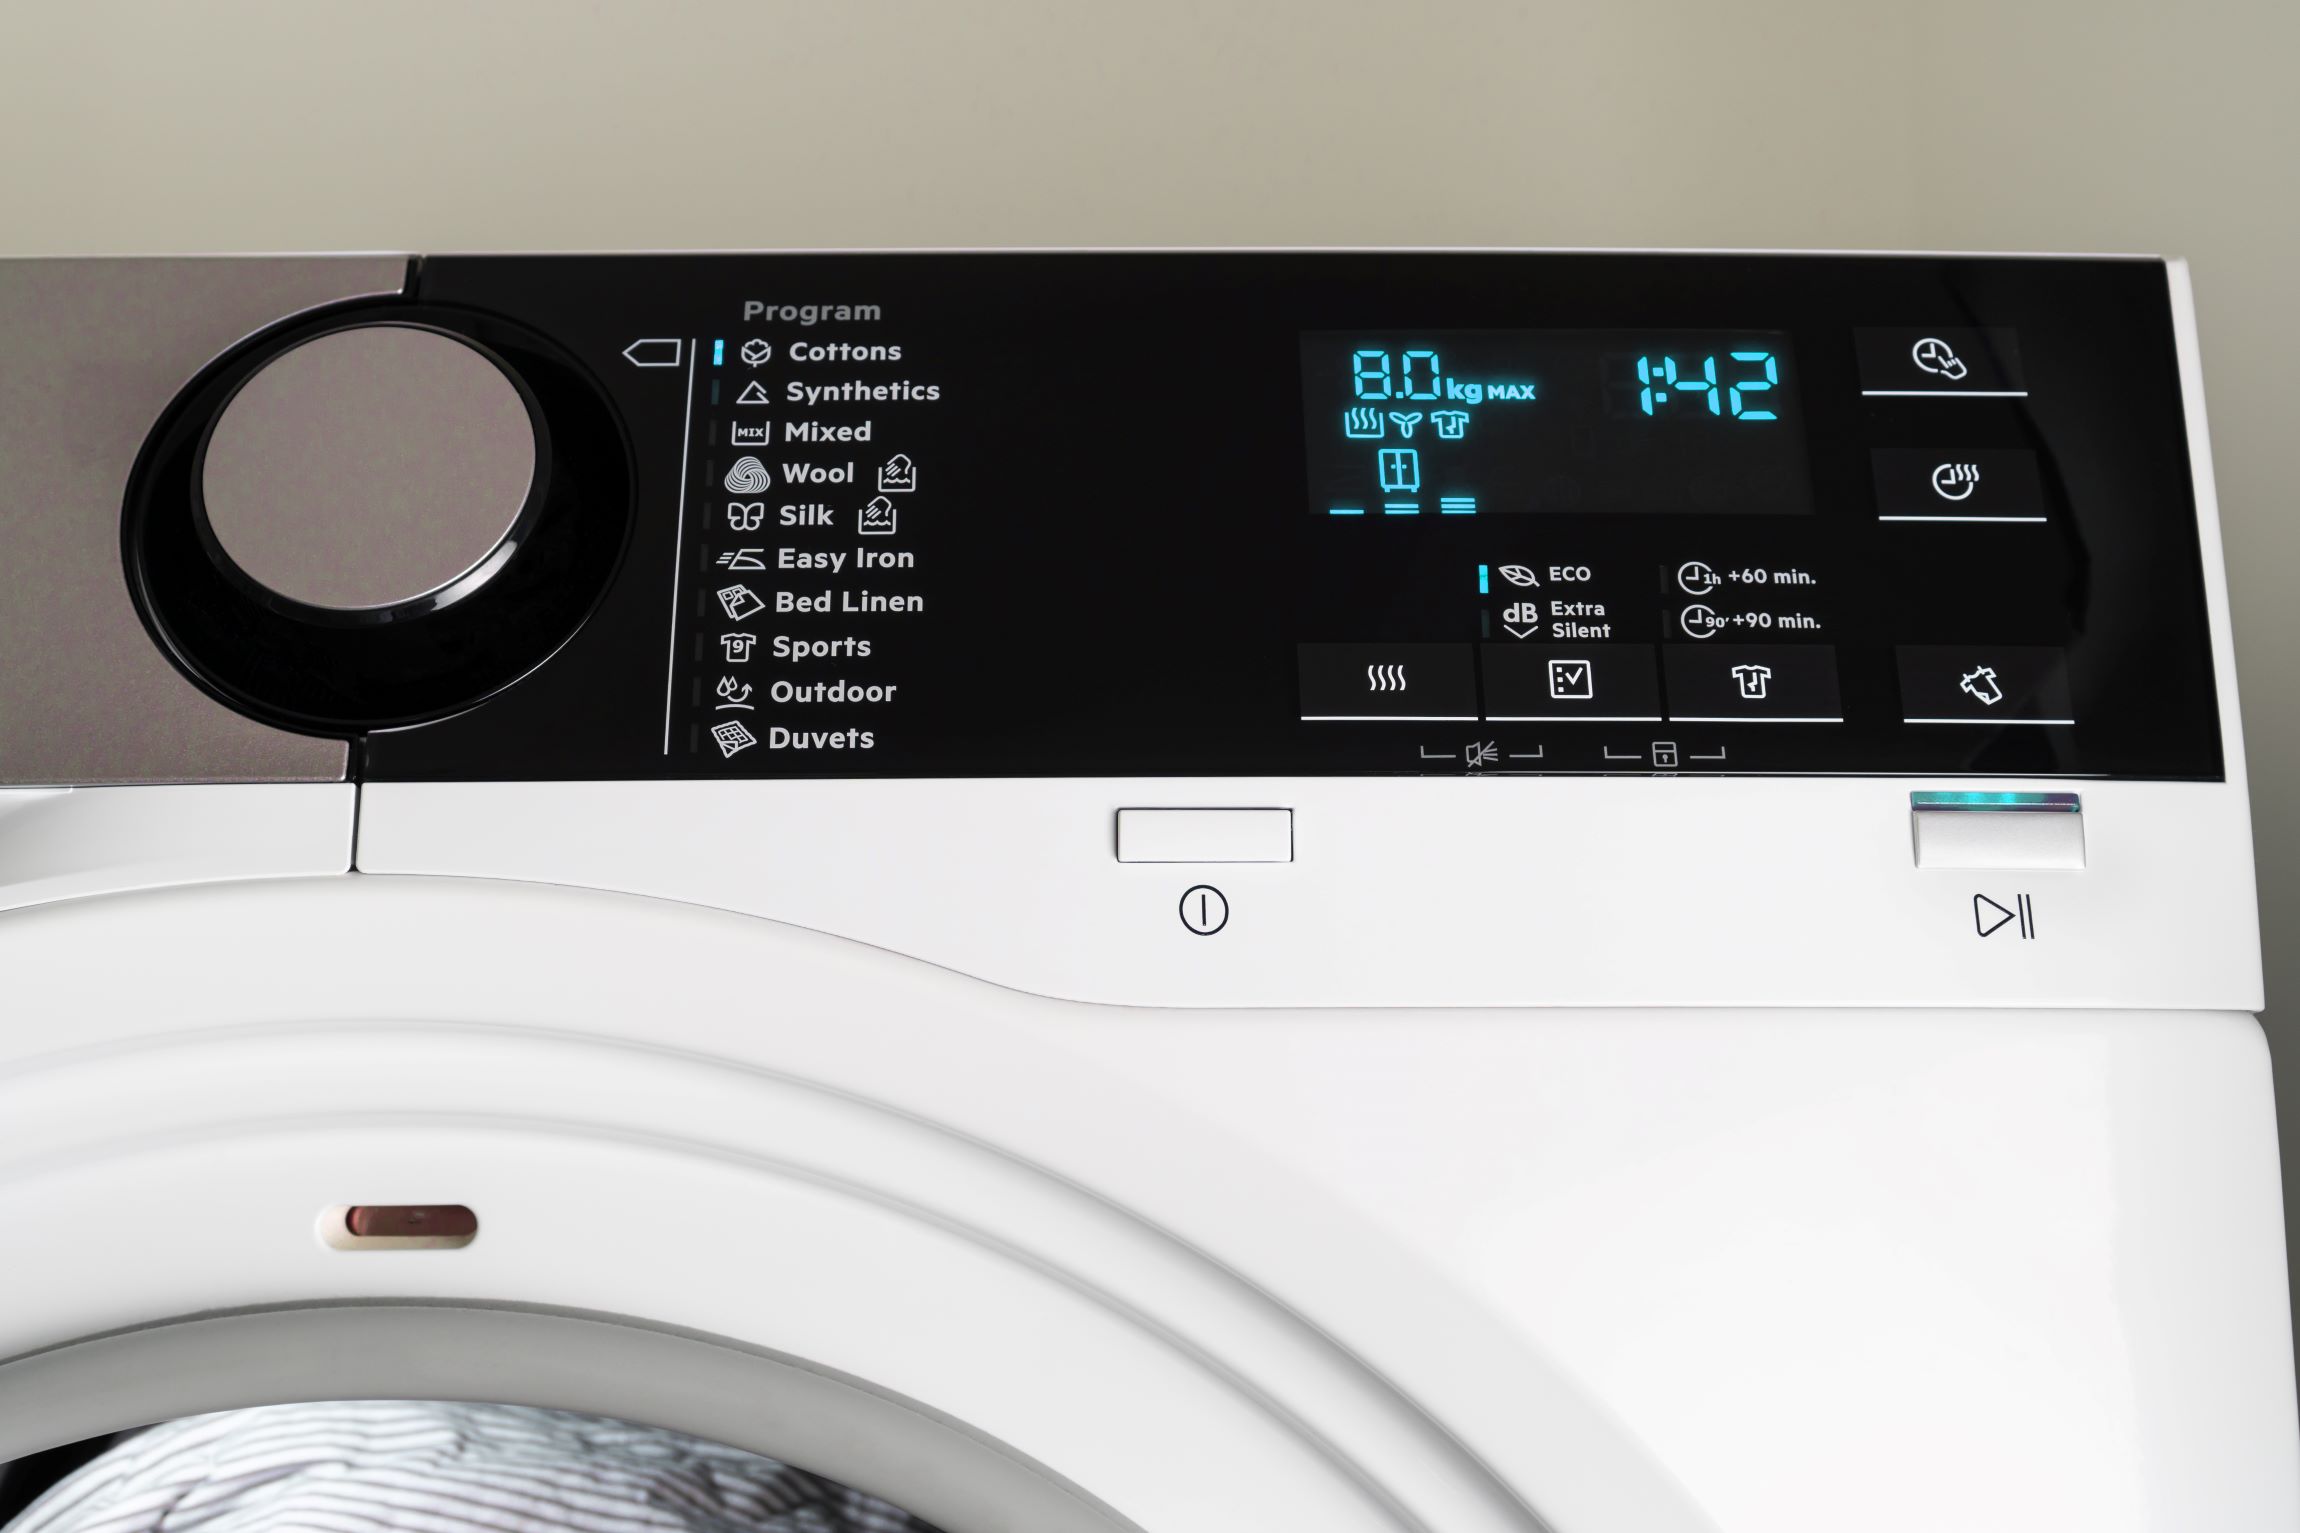 How To Fix The Error Code F32 For Maytag Dryer